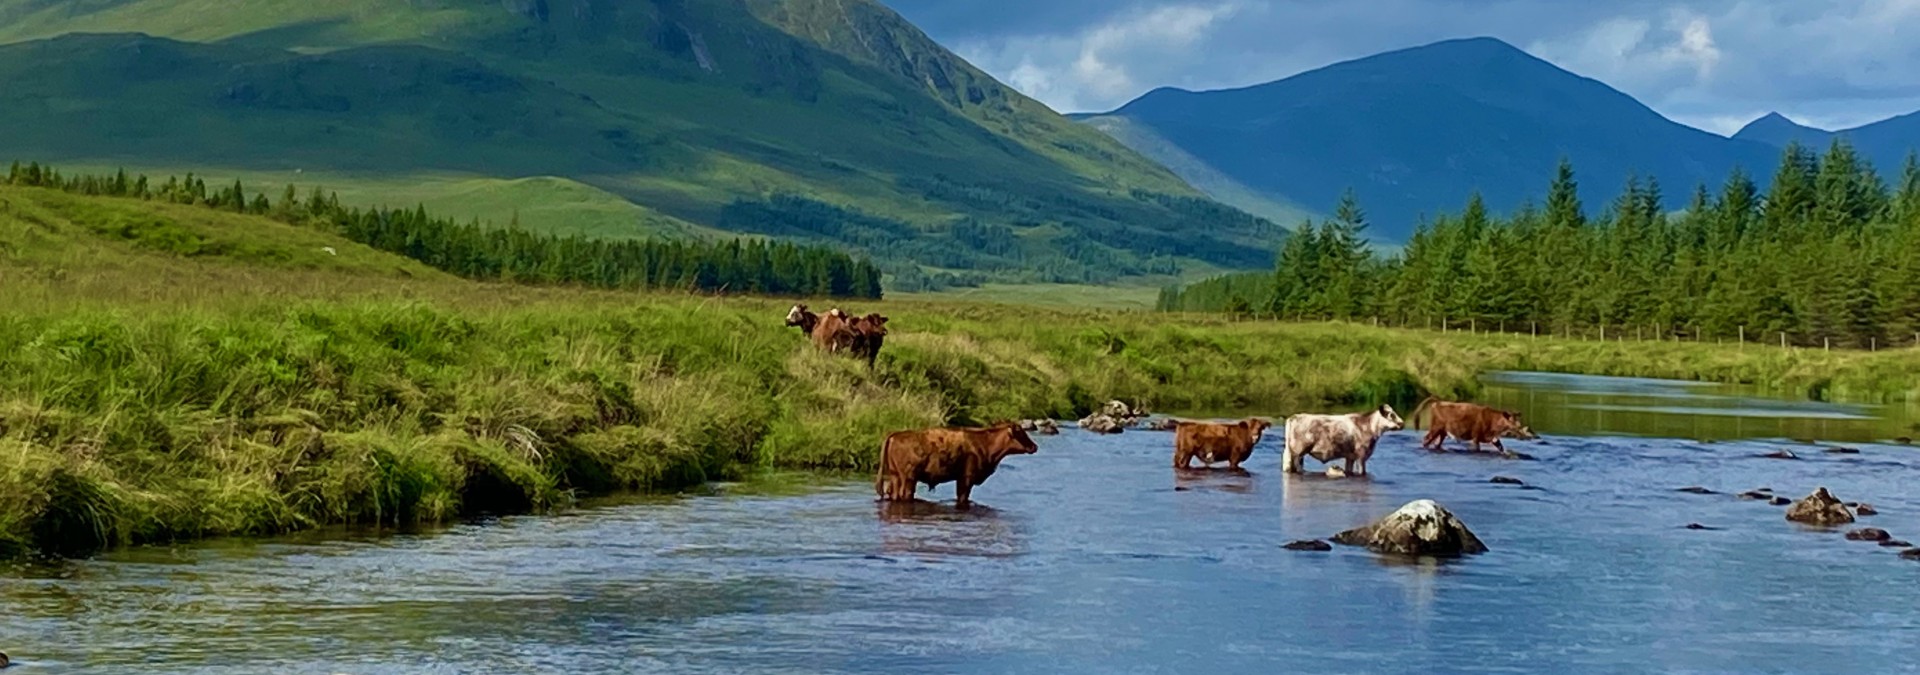 Iconic Highlands image of Highland cattle crossing a river